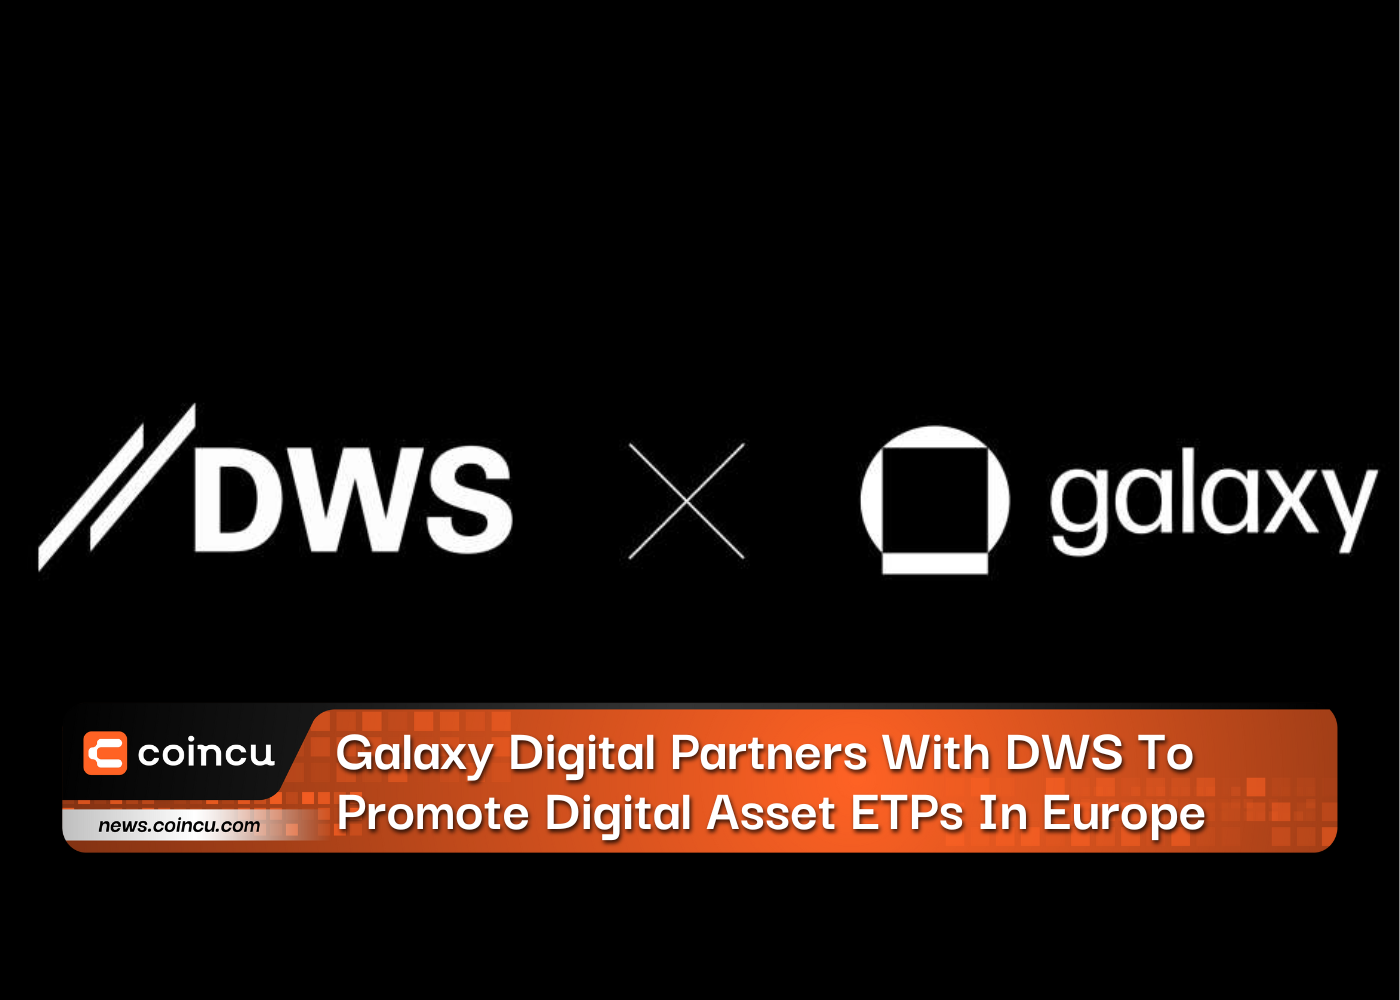 Galaxy Digital Partners With DWS To Promote Digital Asset ETPs In Europe